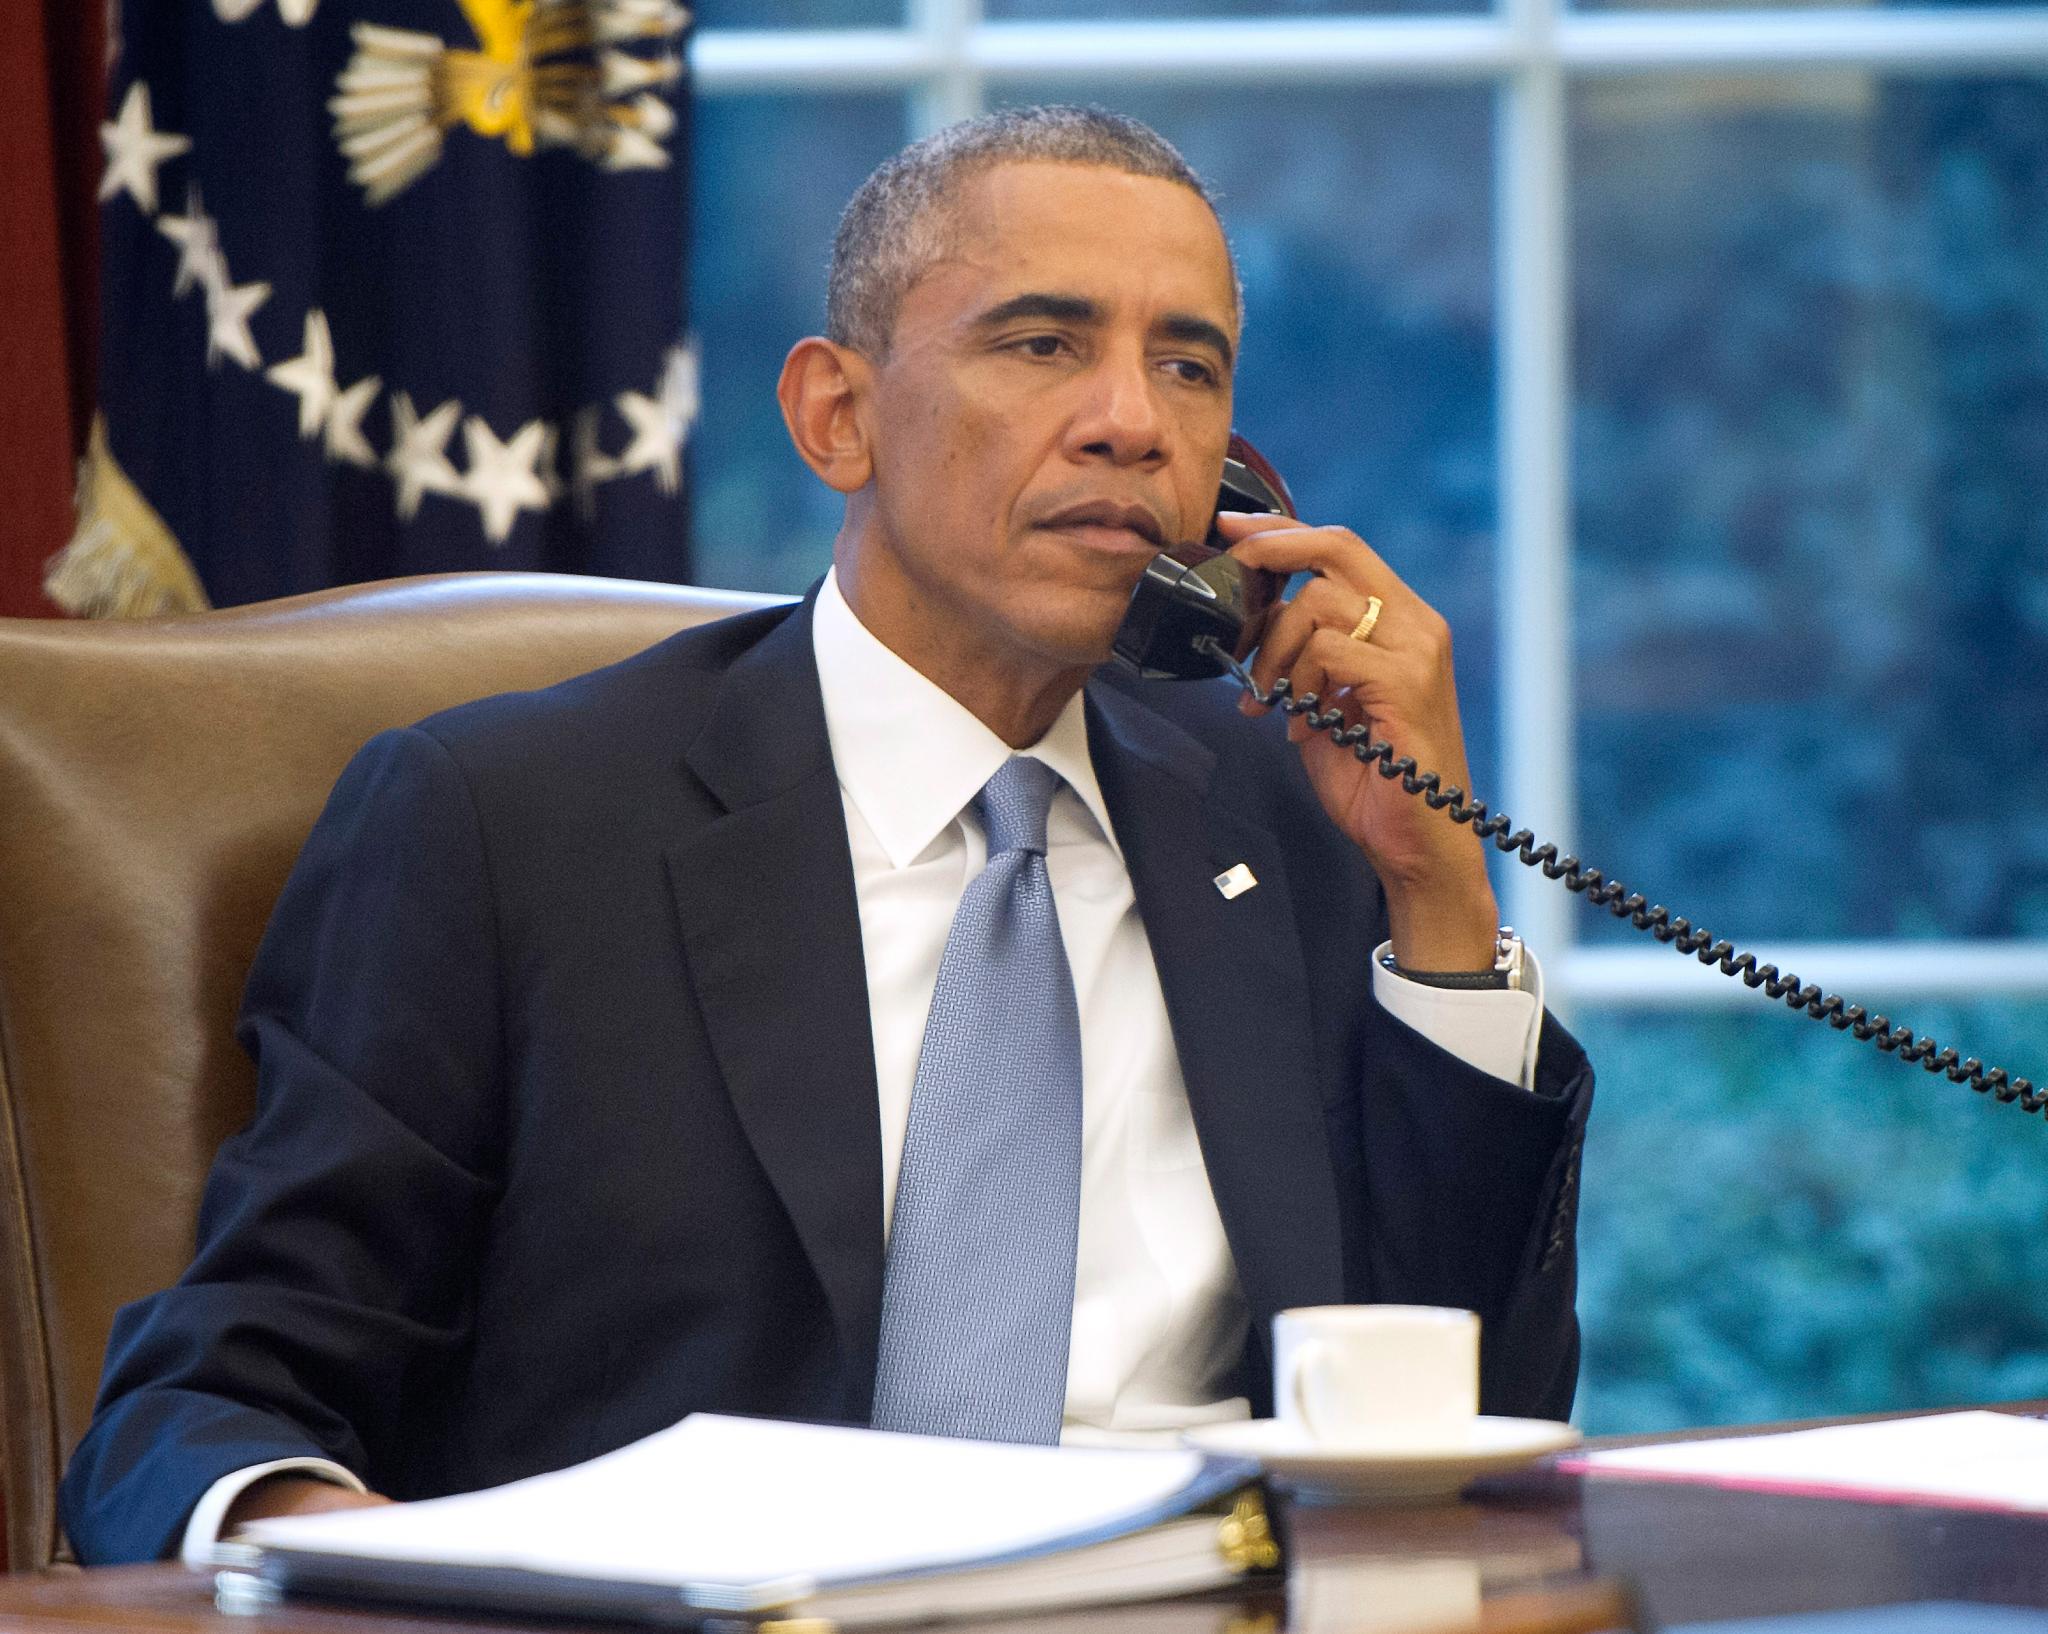 ESSENCE Poll: If President Obama Called You Today, What Would You Say to Him?